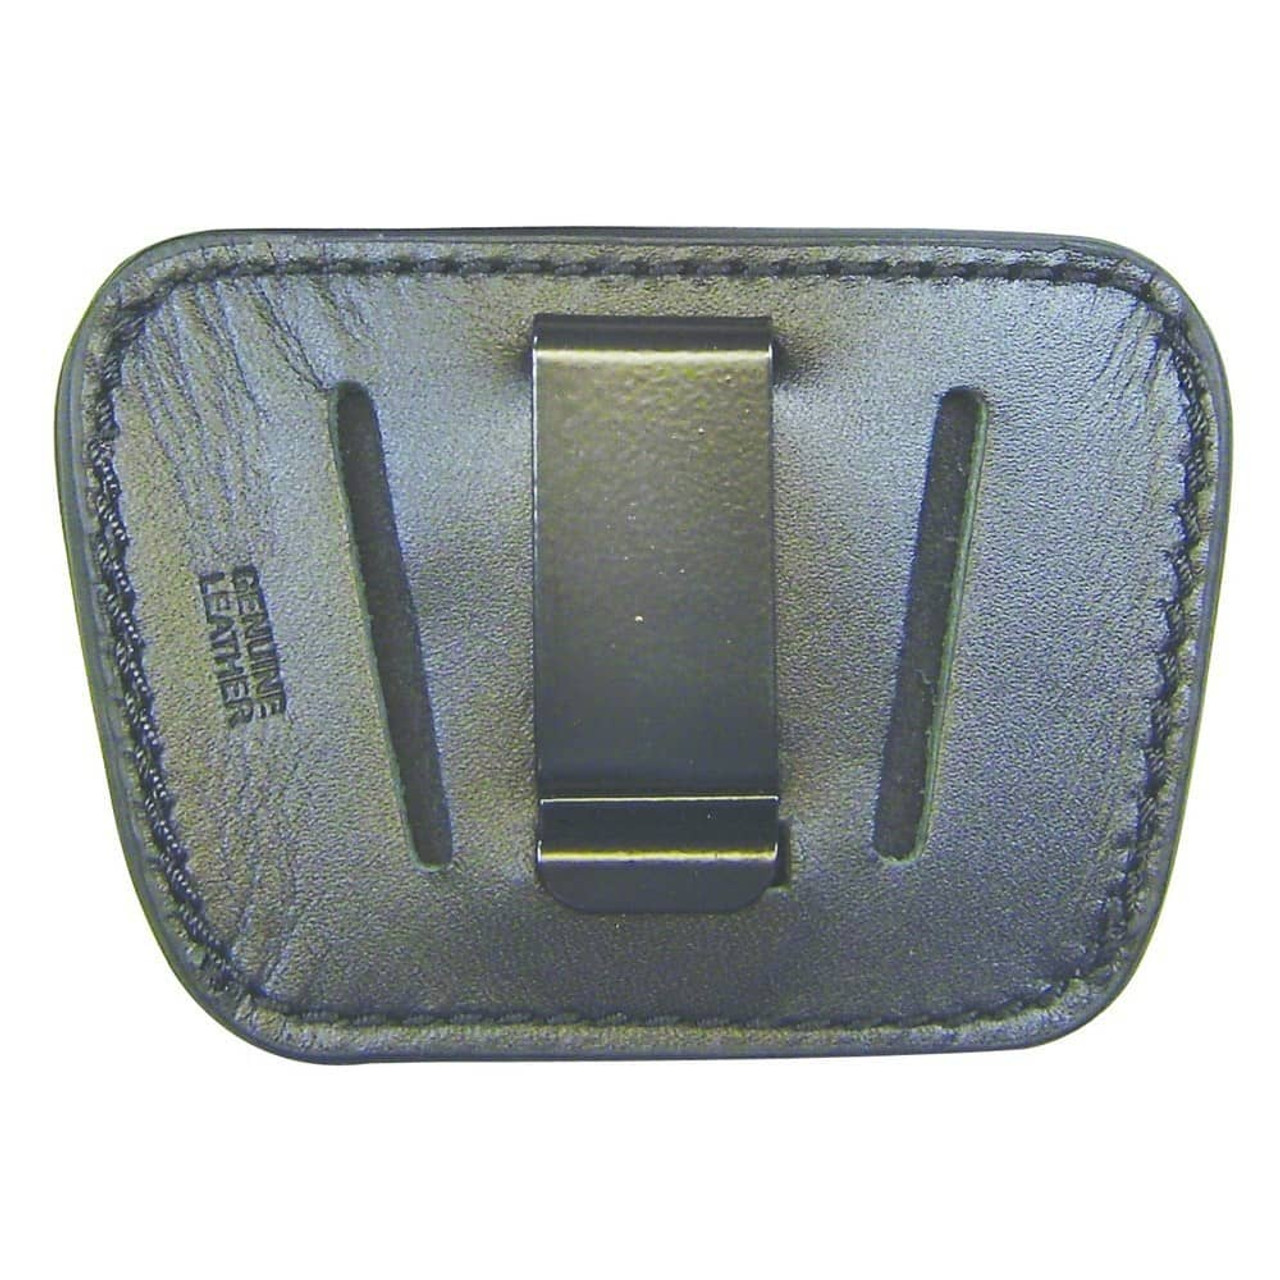  Zap Black Genuine Leather Concealed Carry Badge